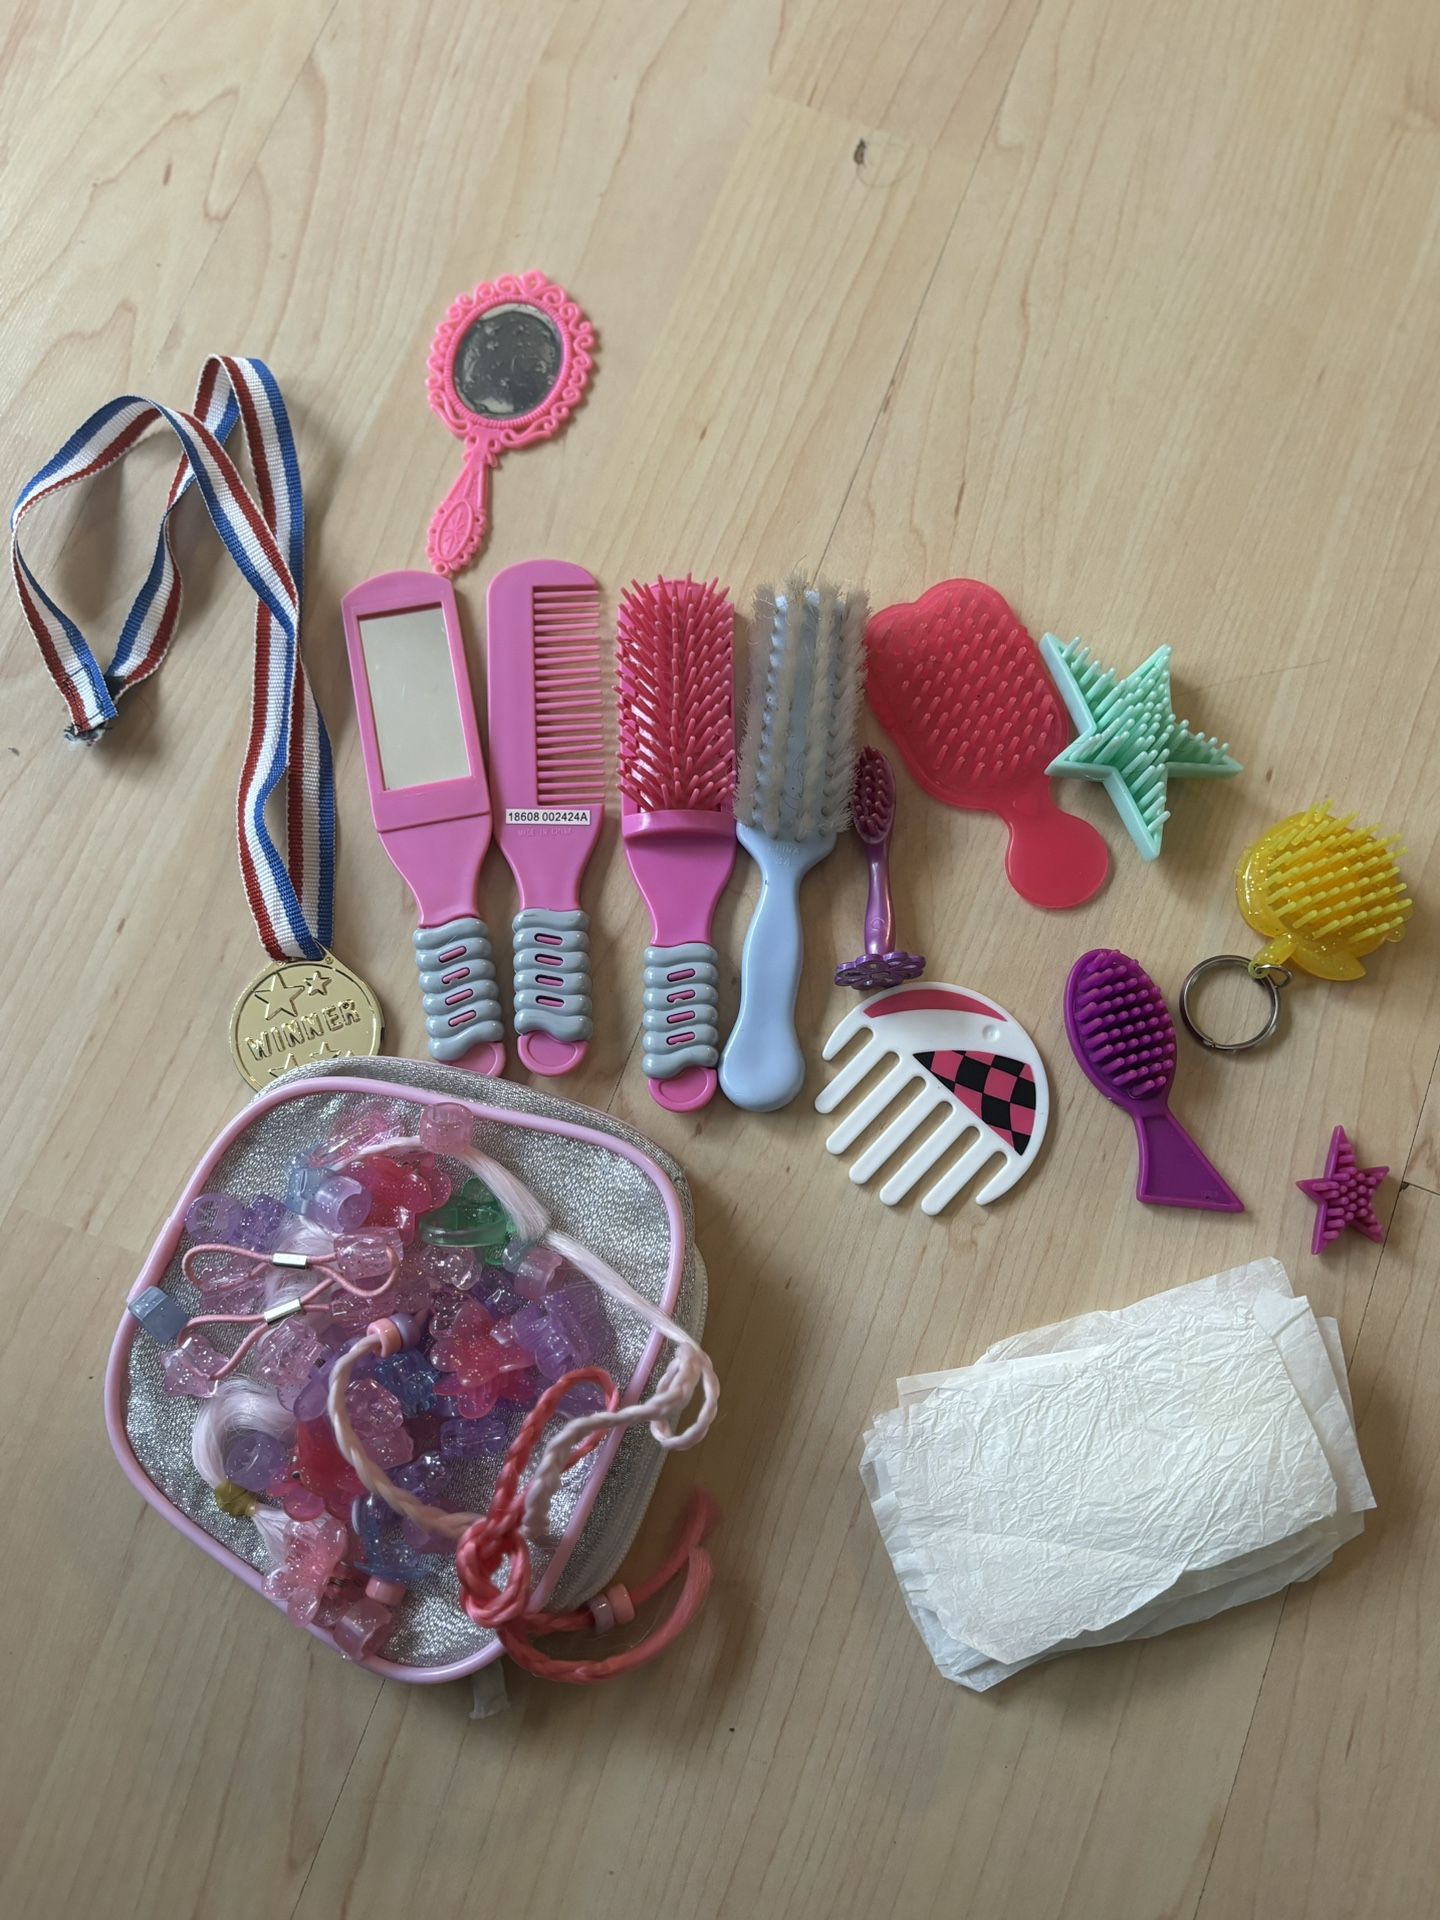 Doll’s Hair Brushes And Accessories .Make Your doll Look As Pretty As Uuuu